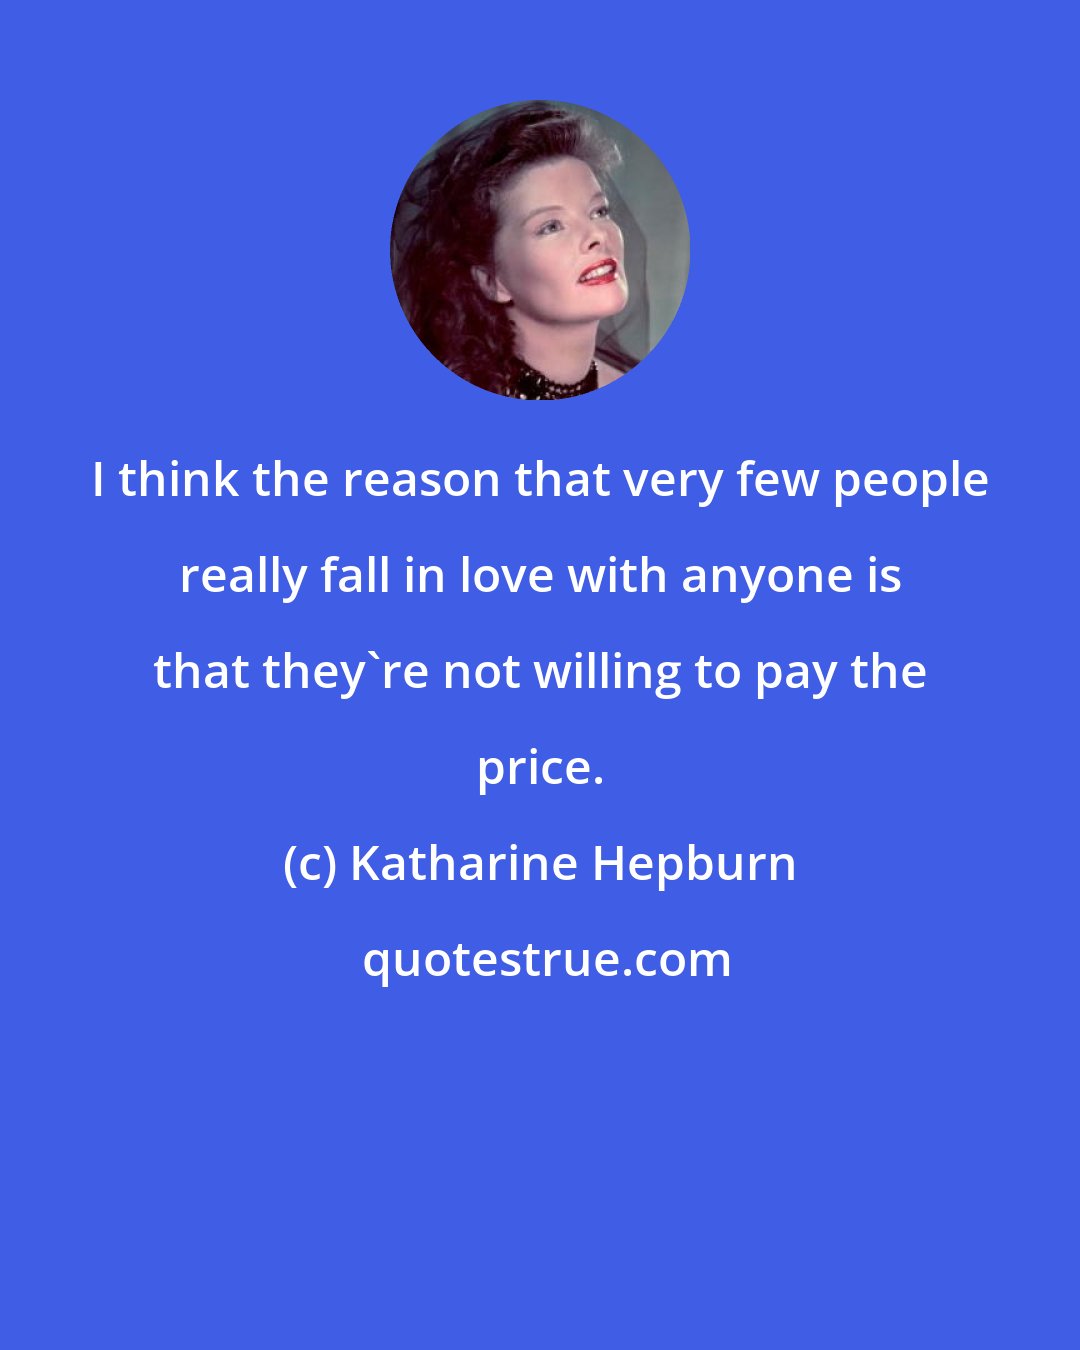 Katharine Hepburn: I think the reason that very few people really fall in love with anyone is that they're not willing to pay the price.